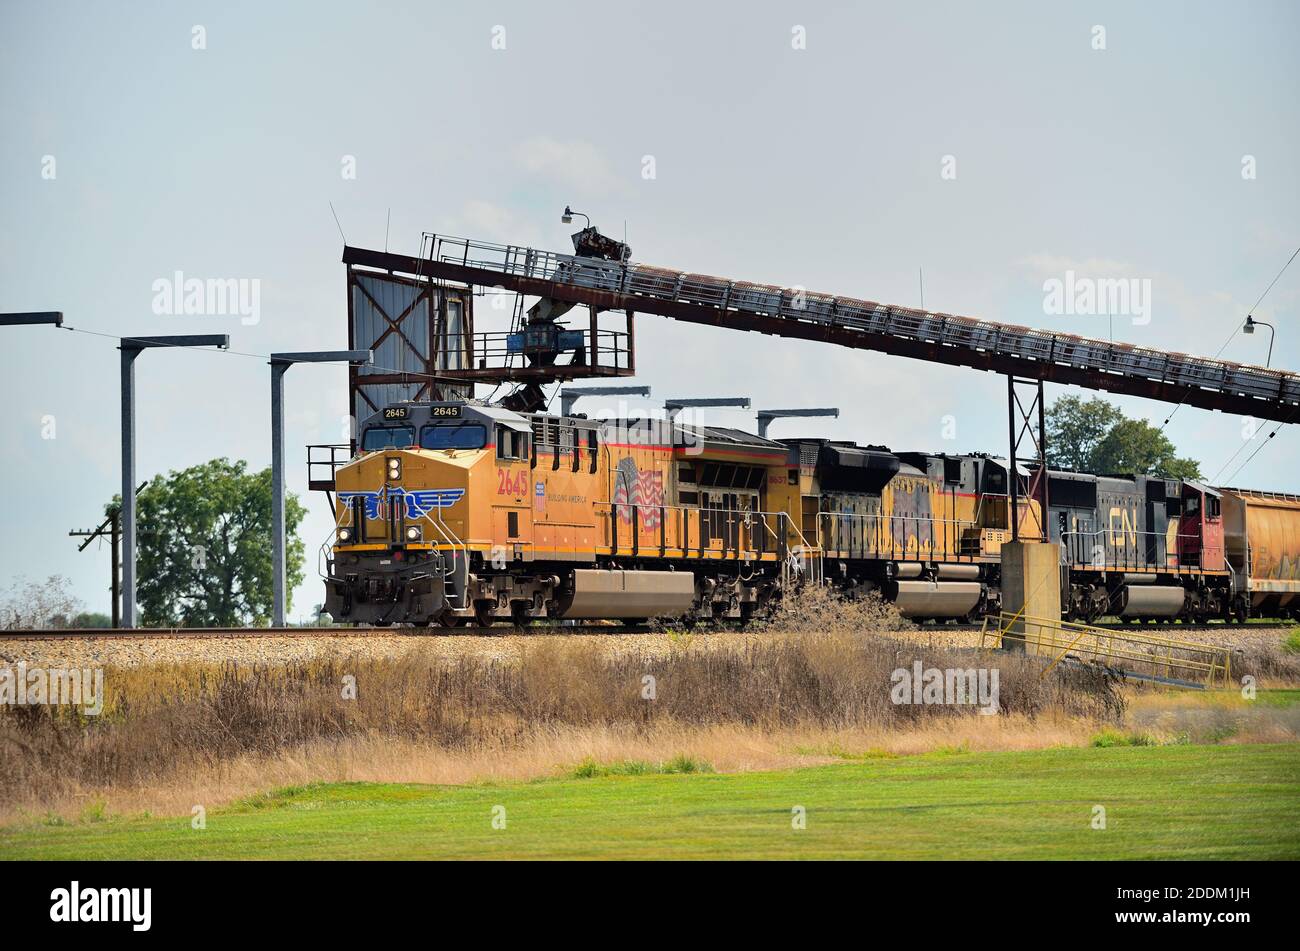 Pesotum, Illinois, USA. A northbound Union Pacific freight train passing a grain elevator and farm cooperative. Stock Photo